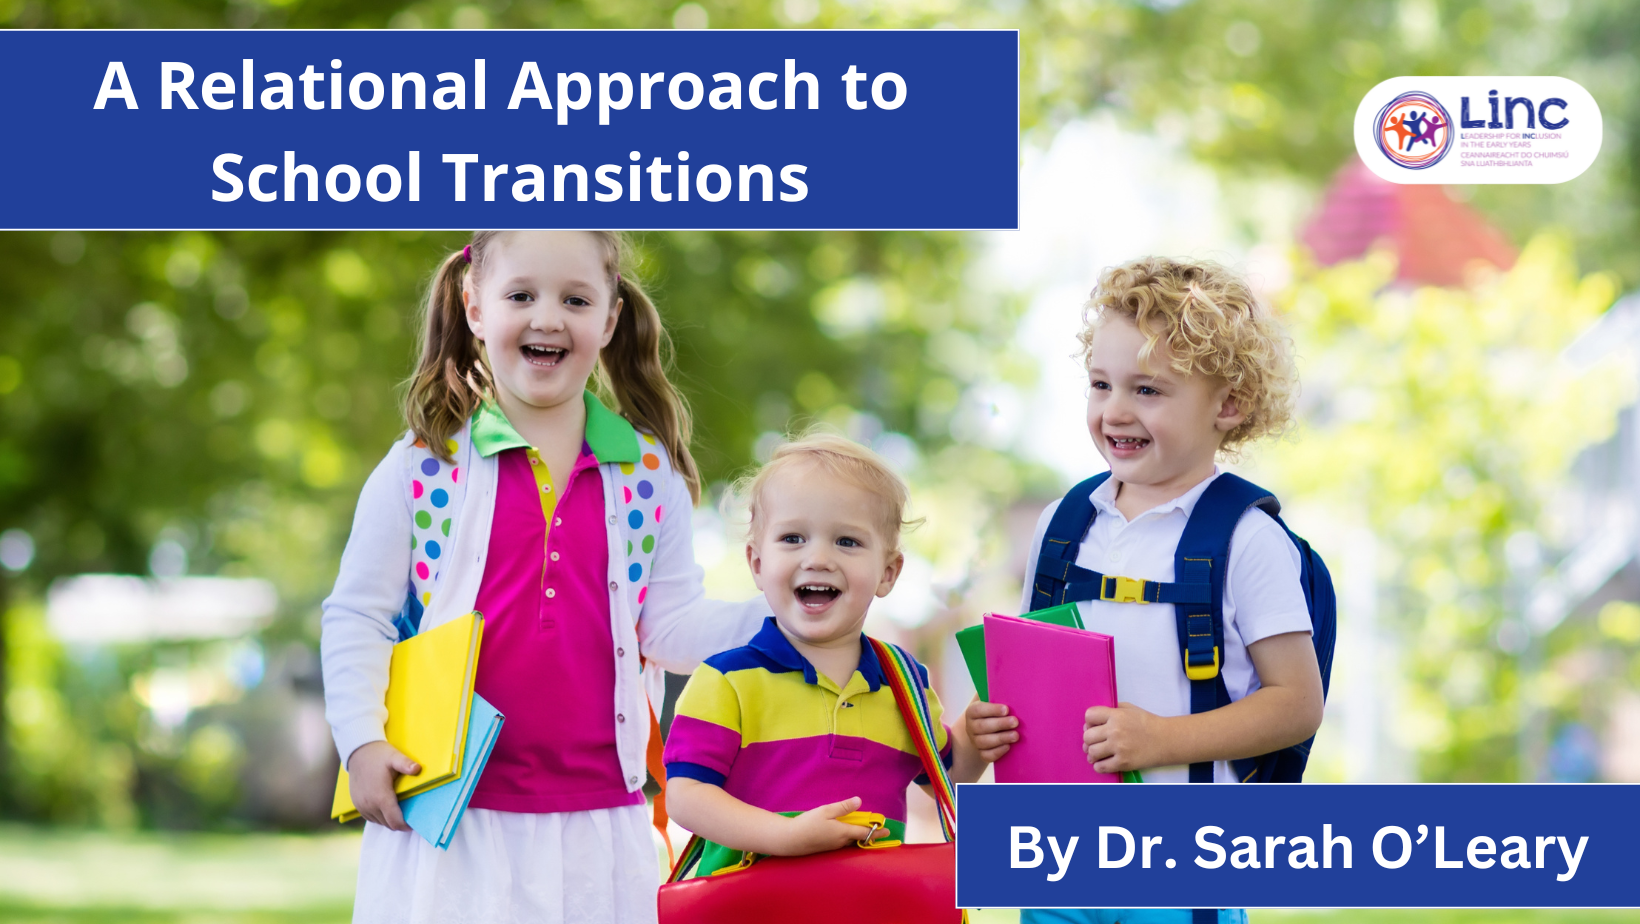 A Relational Approach to School Transitions